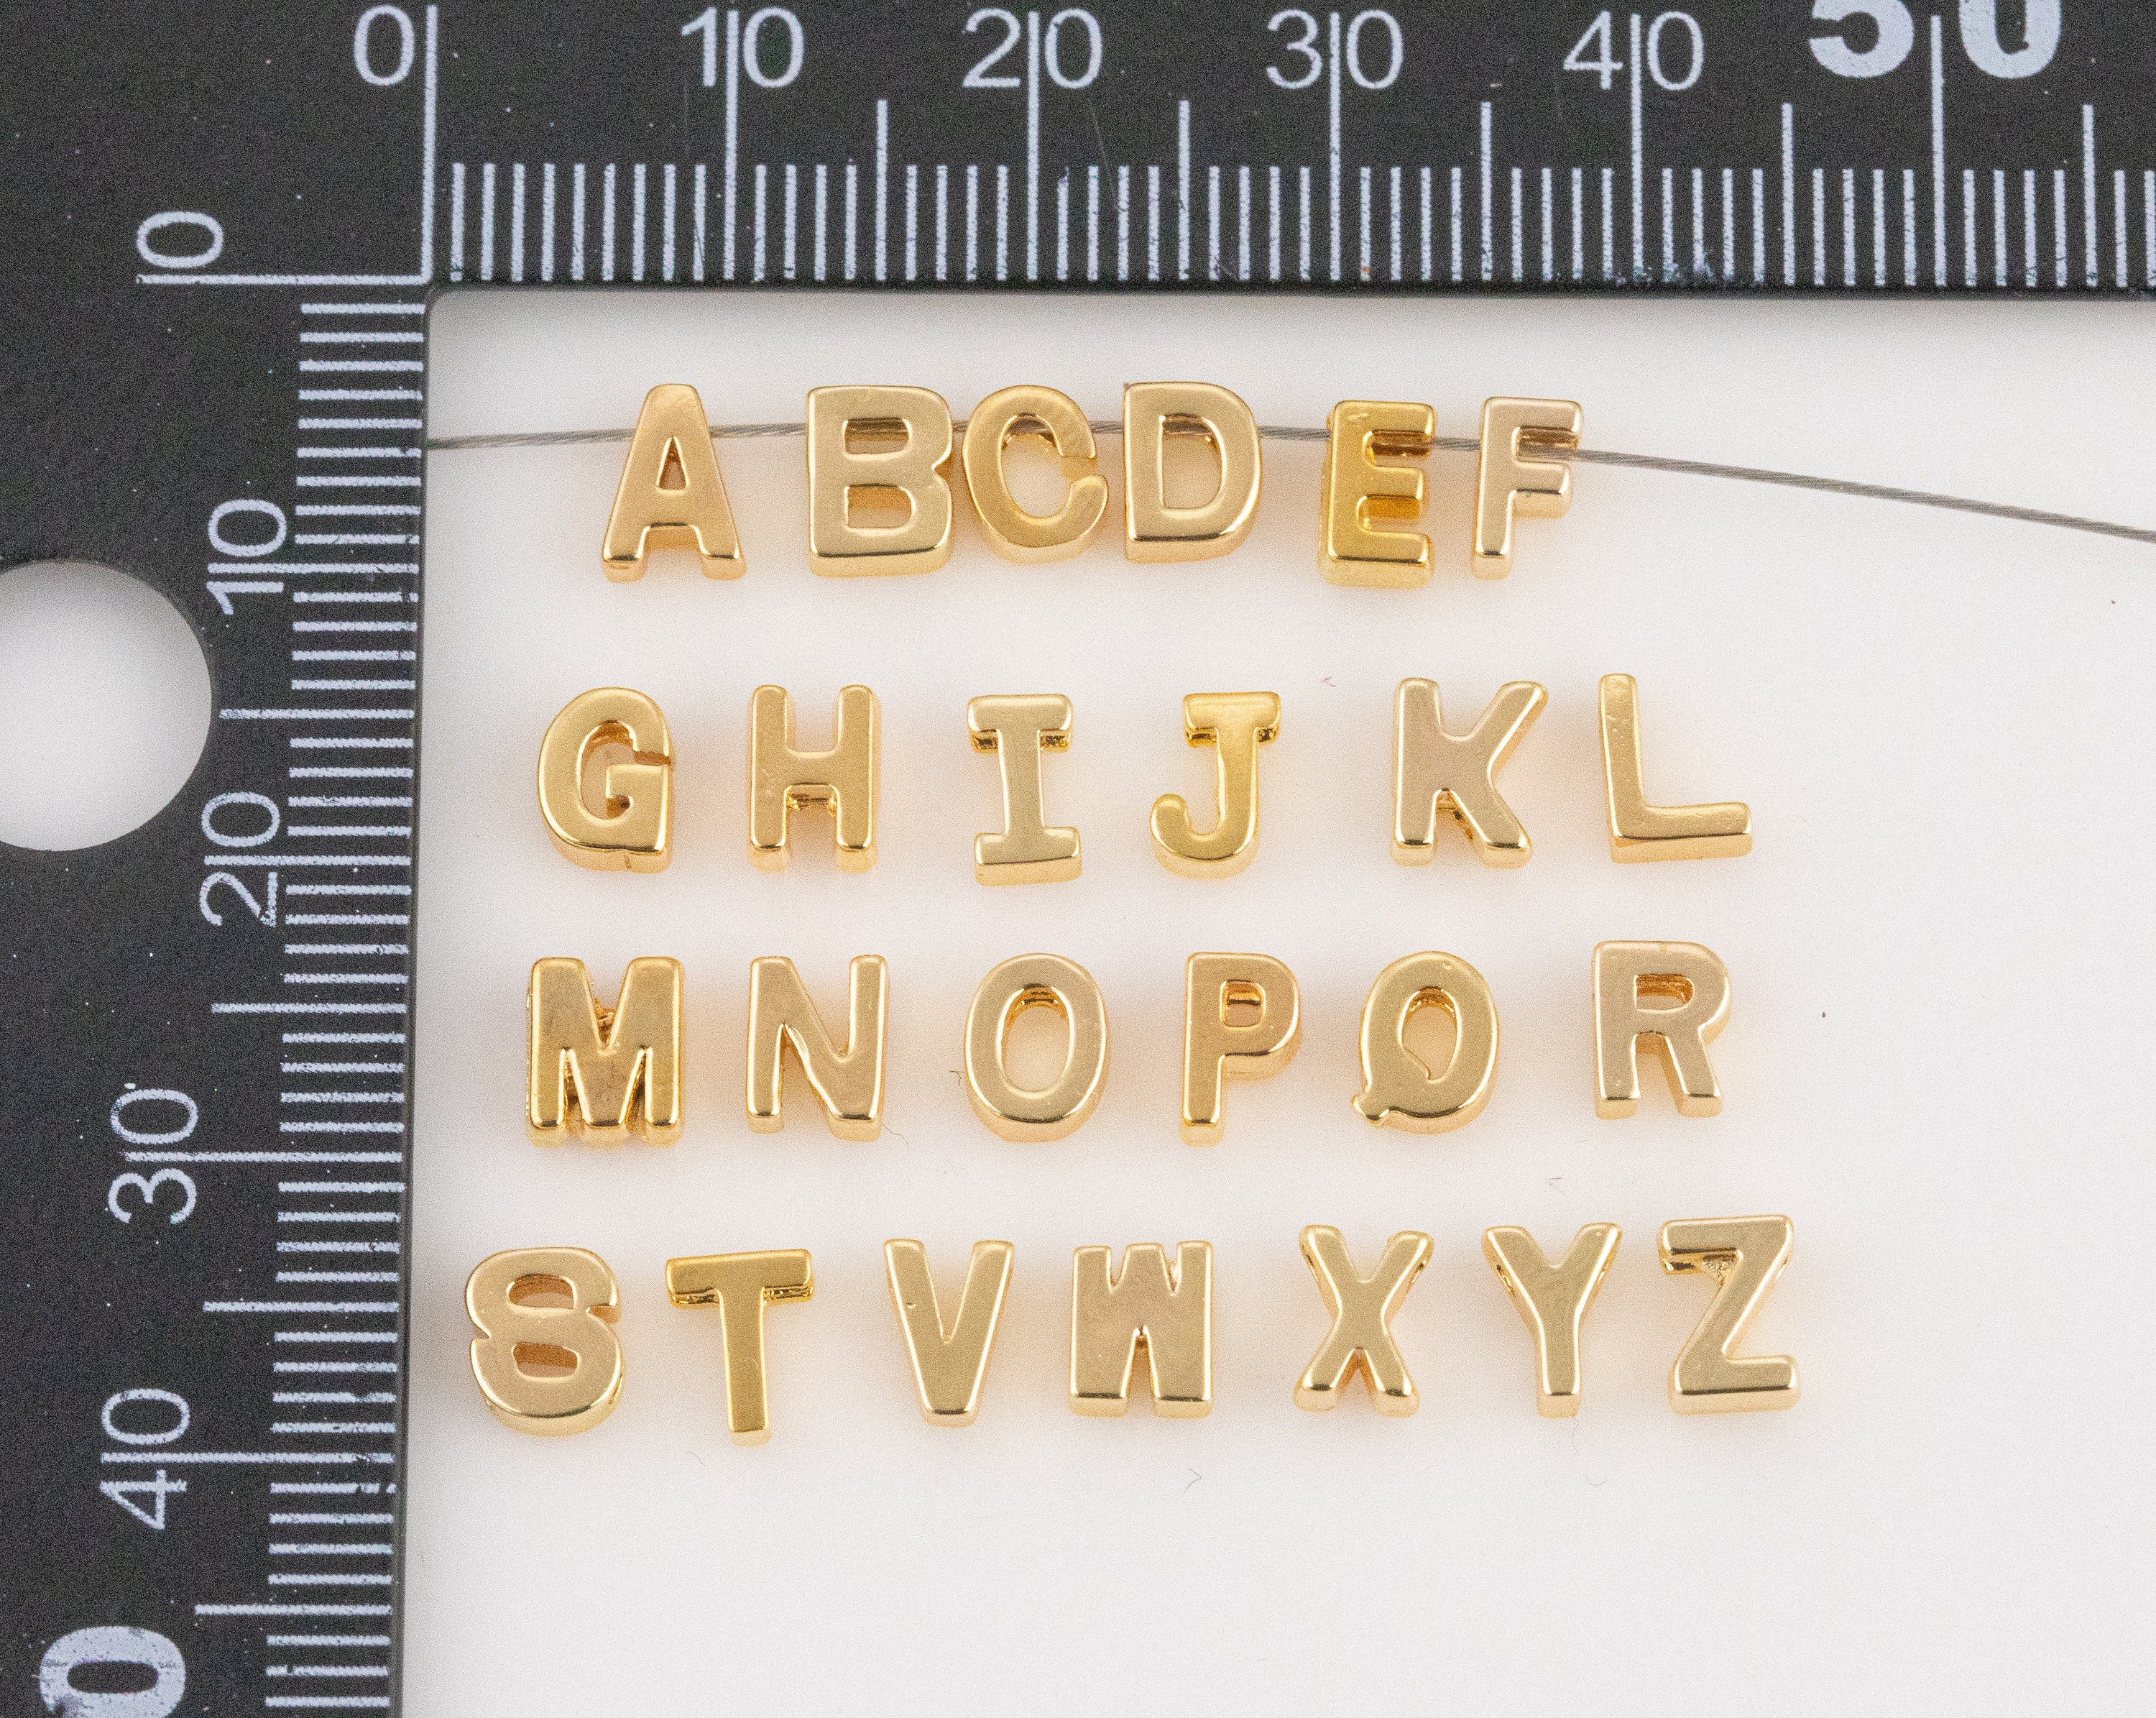  ARTDOT 800 PCS Letter Beads for 𝐅𝐫𝐢𝐞𝐧𝐝𝐬𝐡𝐢𝐩  𝐁𝐫𝐚𝐜𝐞𝐥𝐞𝐭𝐬 Jewelry Making kit, 28 Styles Assorted Alphabet Beads  Colorful Preppy Beads for Teen Girl Gifts : Arts, Crafts & Sewing